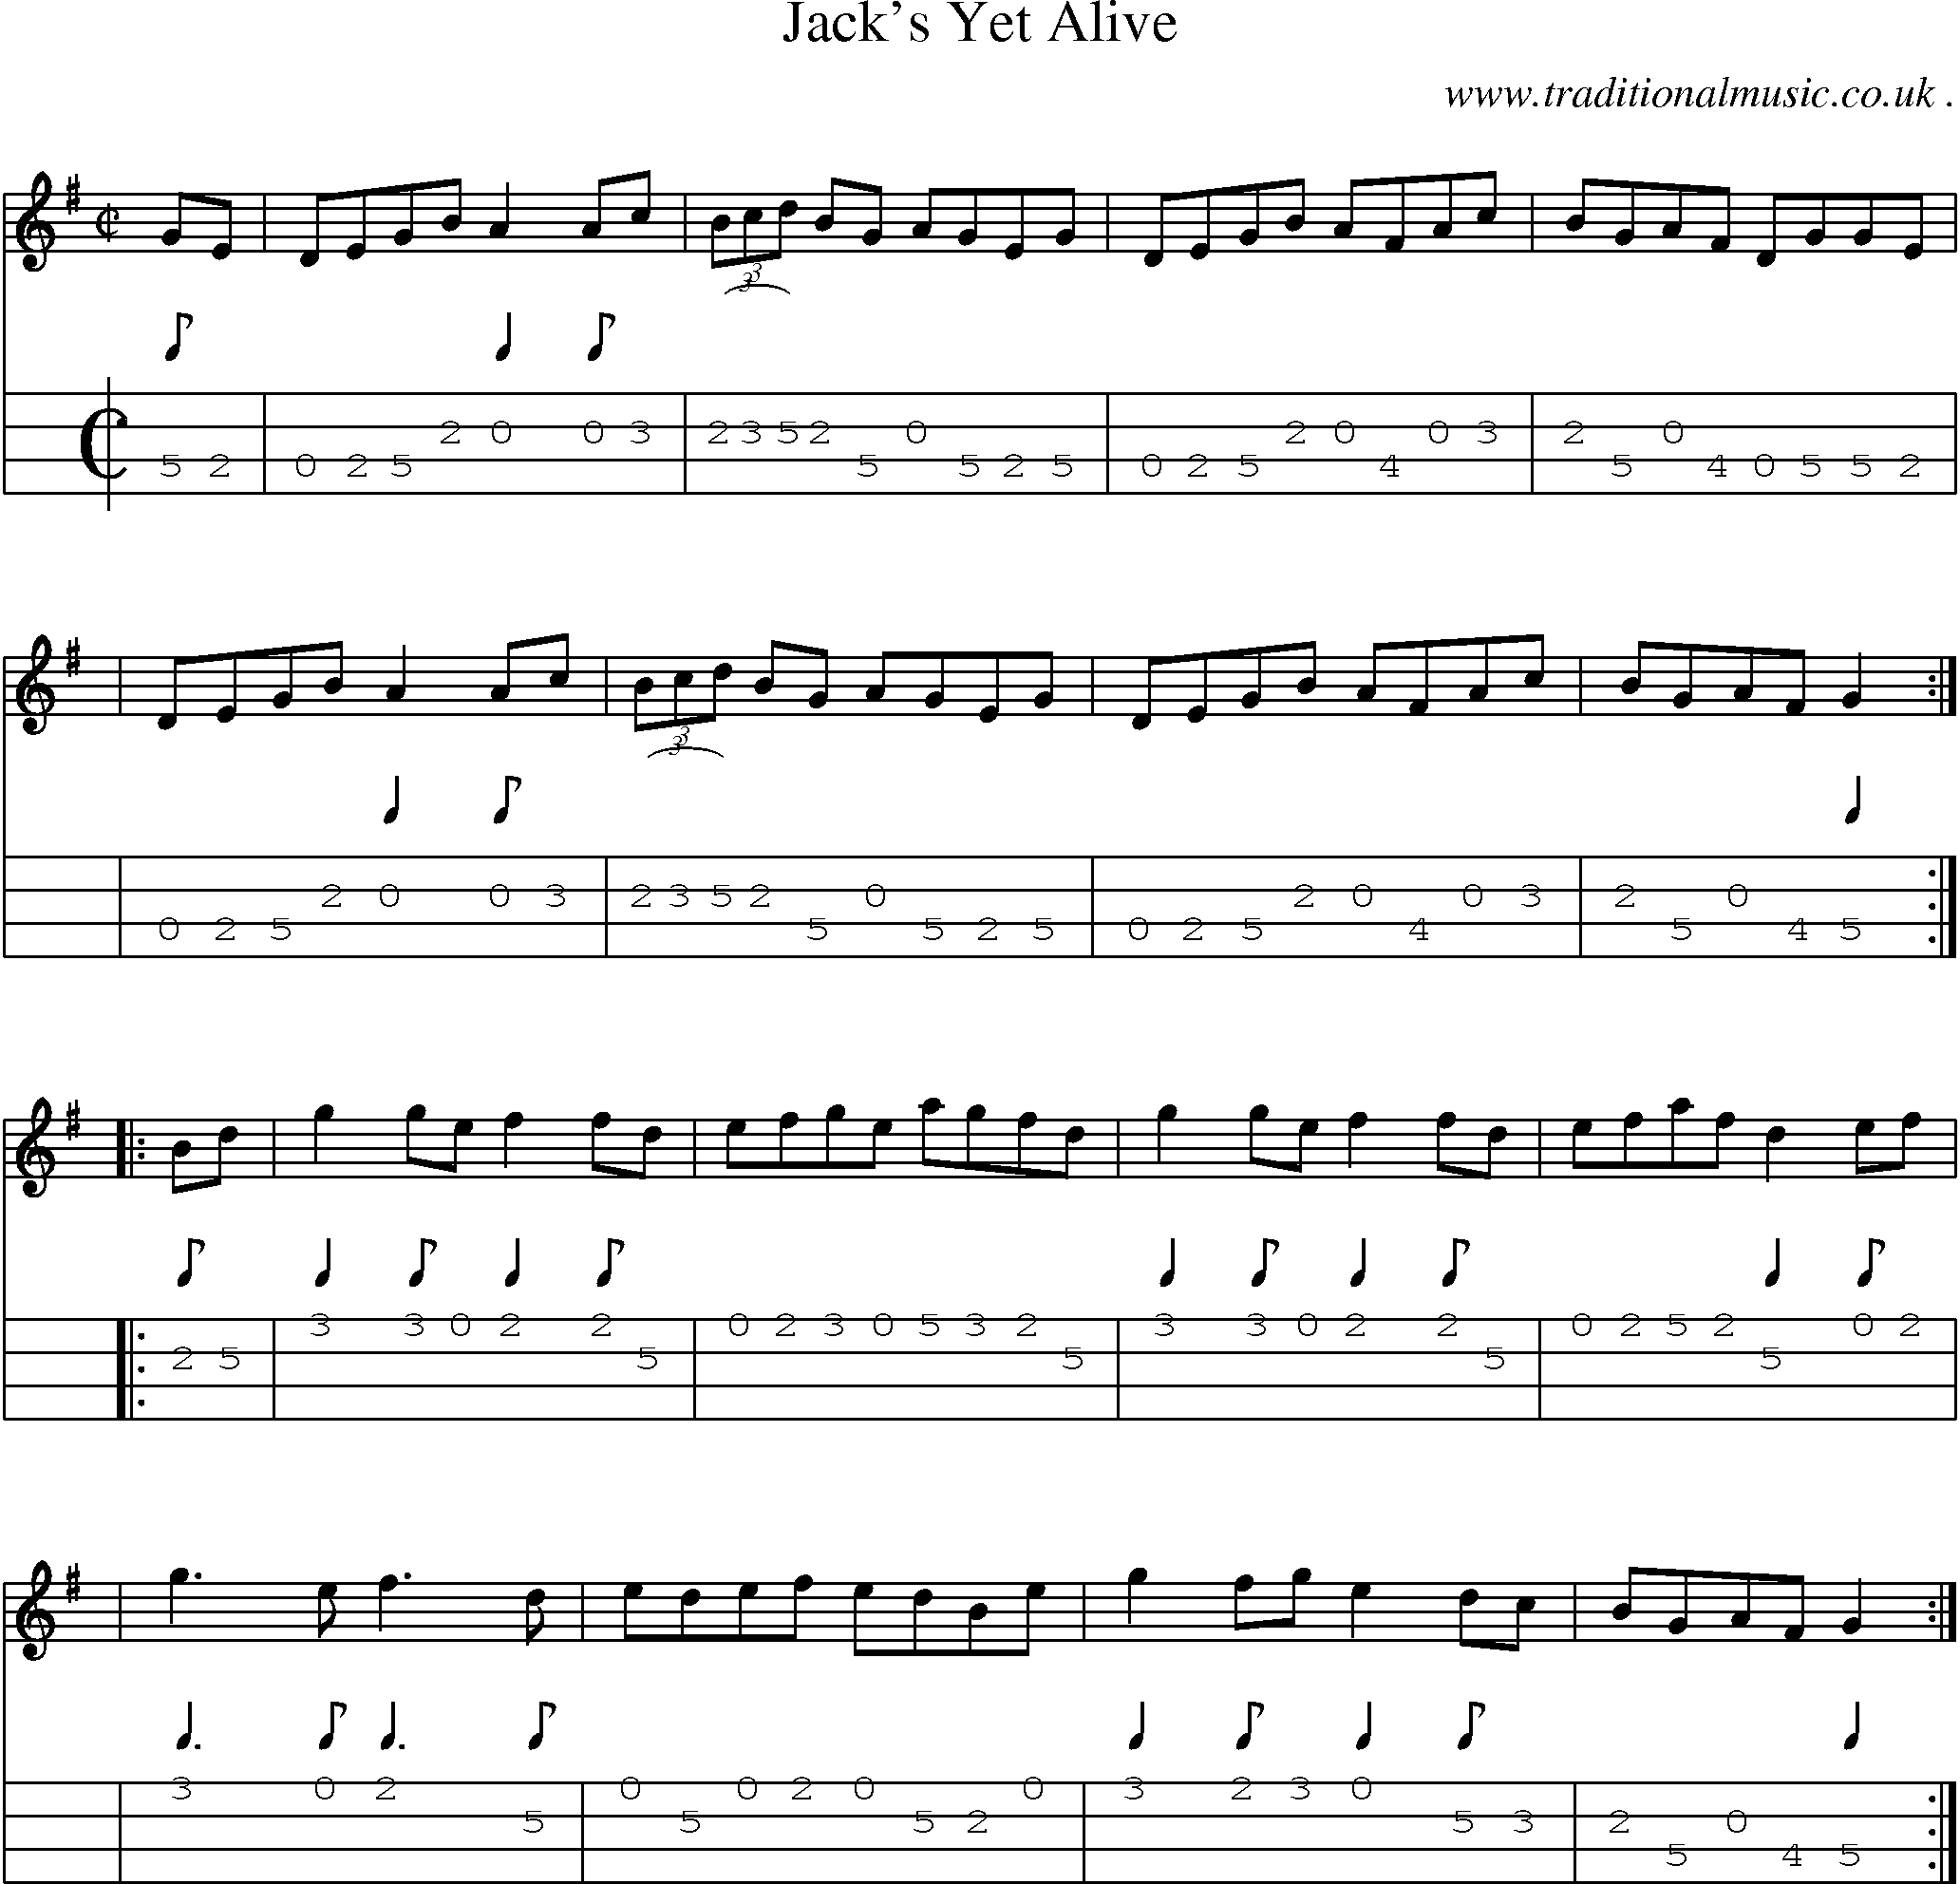 Sheet-music  score, Chords and Mandolin Tabs for Jacks Yet Alive